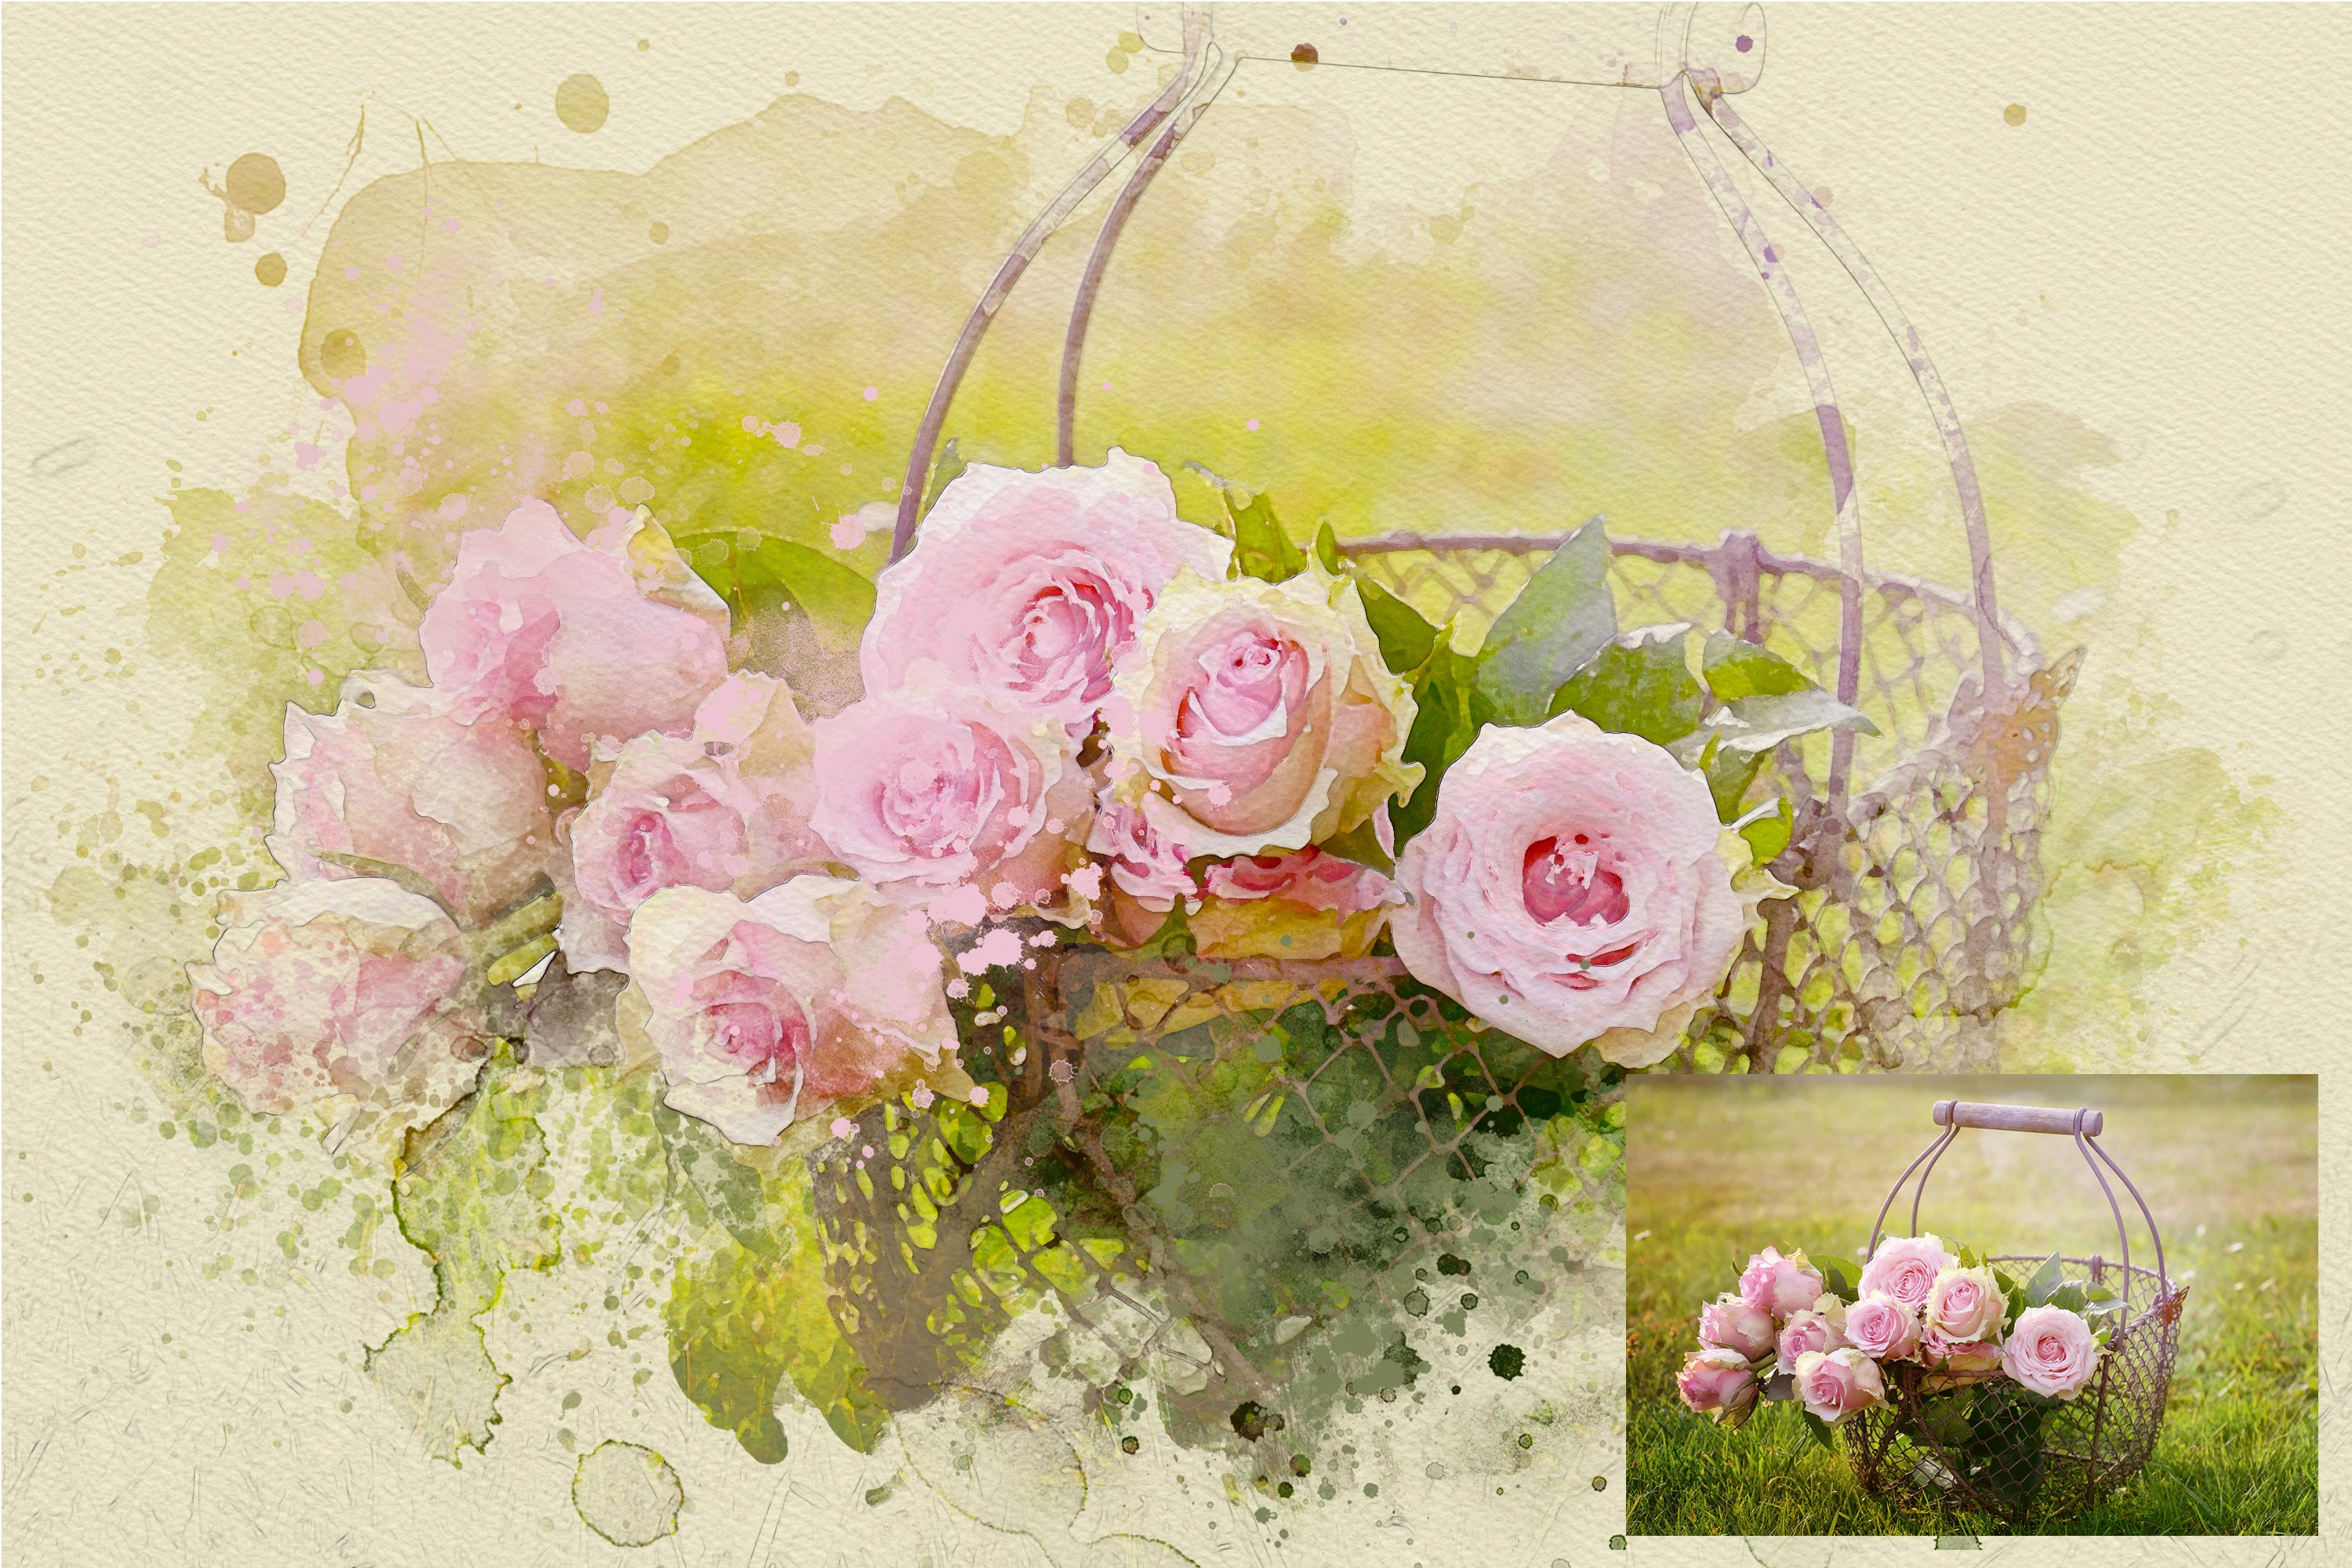 Realistic Watercolor Photo Effectpreview image.